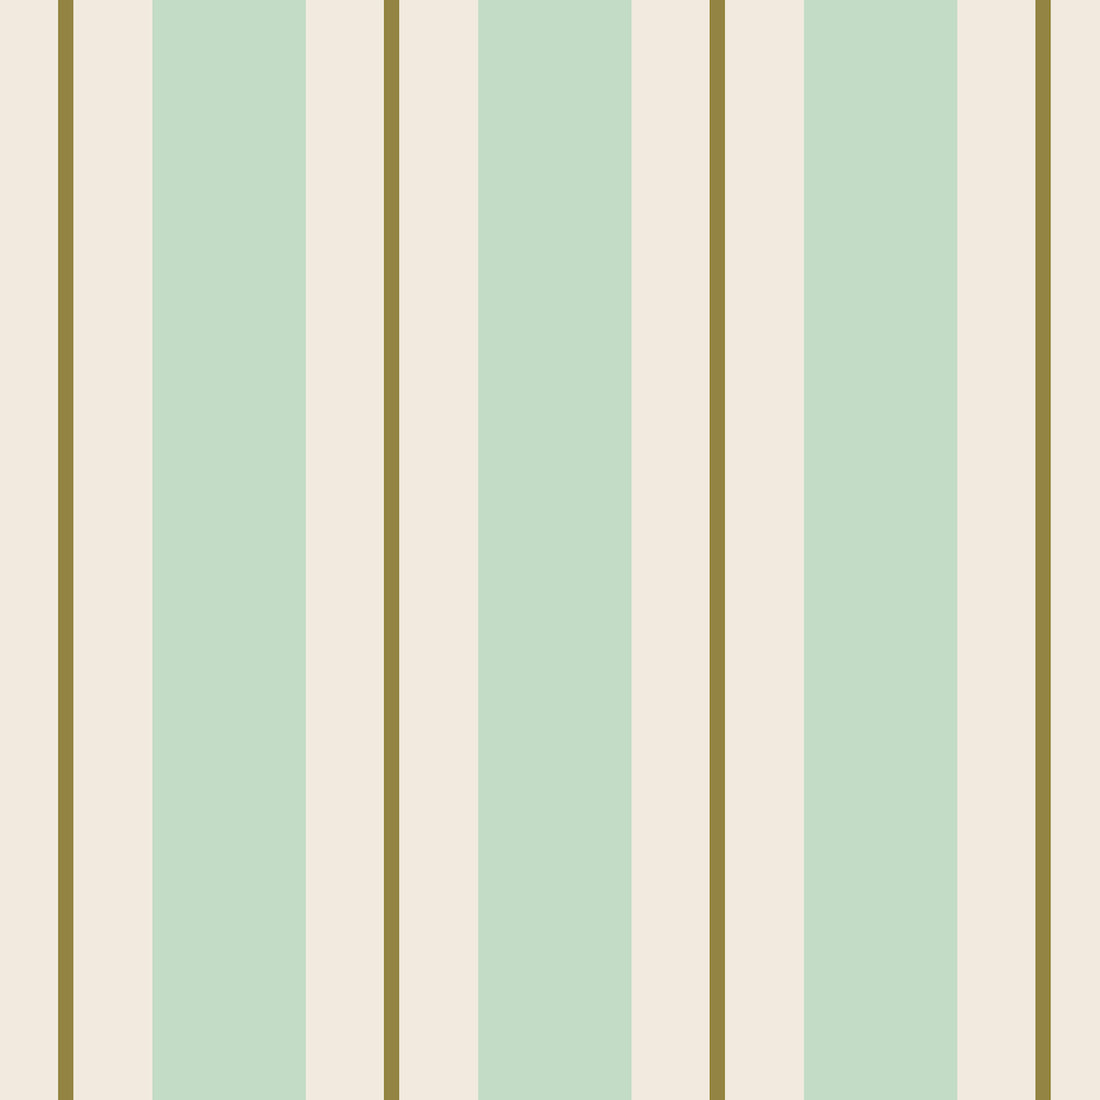 A square cocktail napkin featuring vertical seafoam and white stripes, with a gold line running down the center of each white stripe.